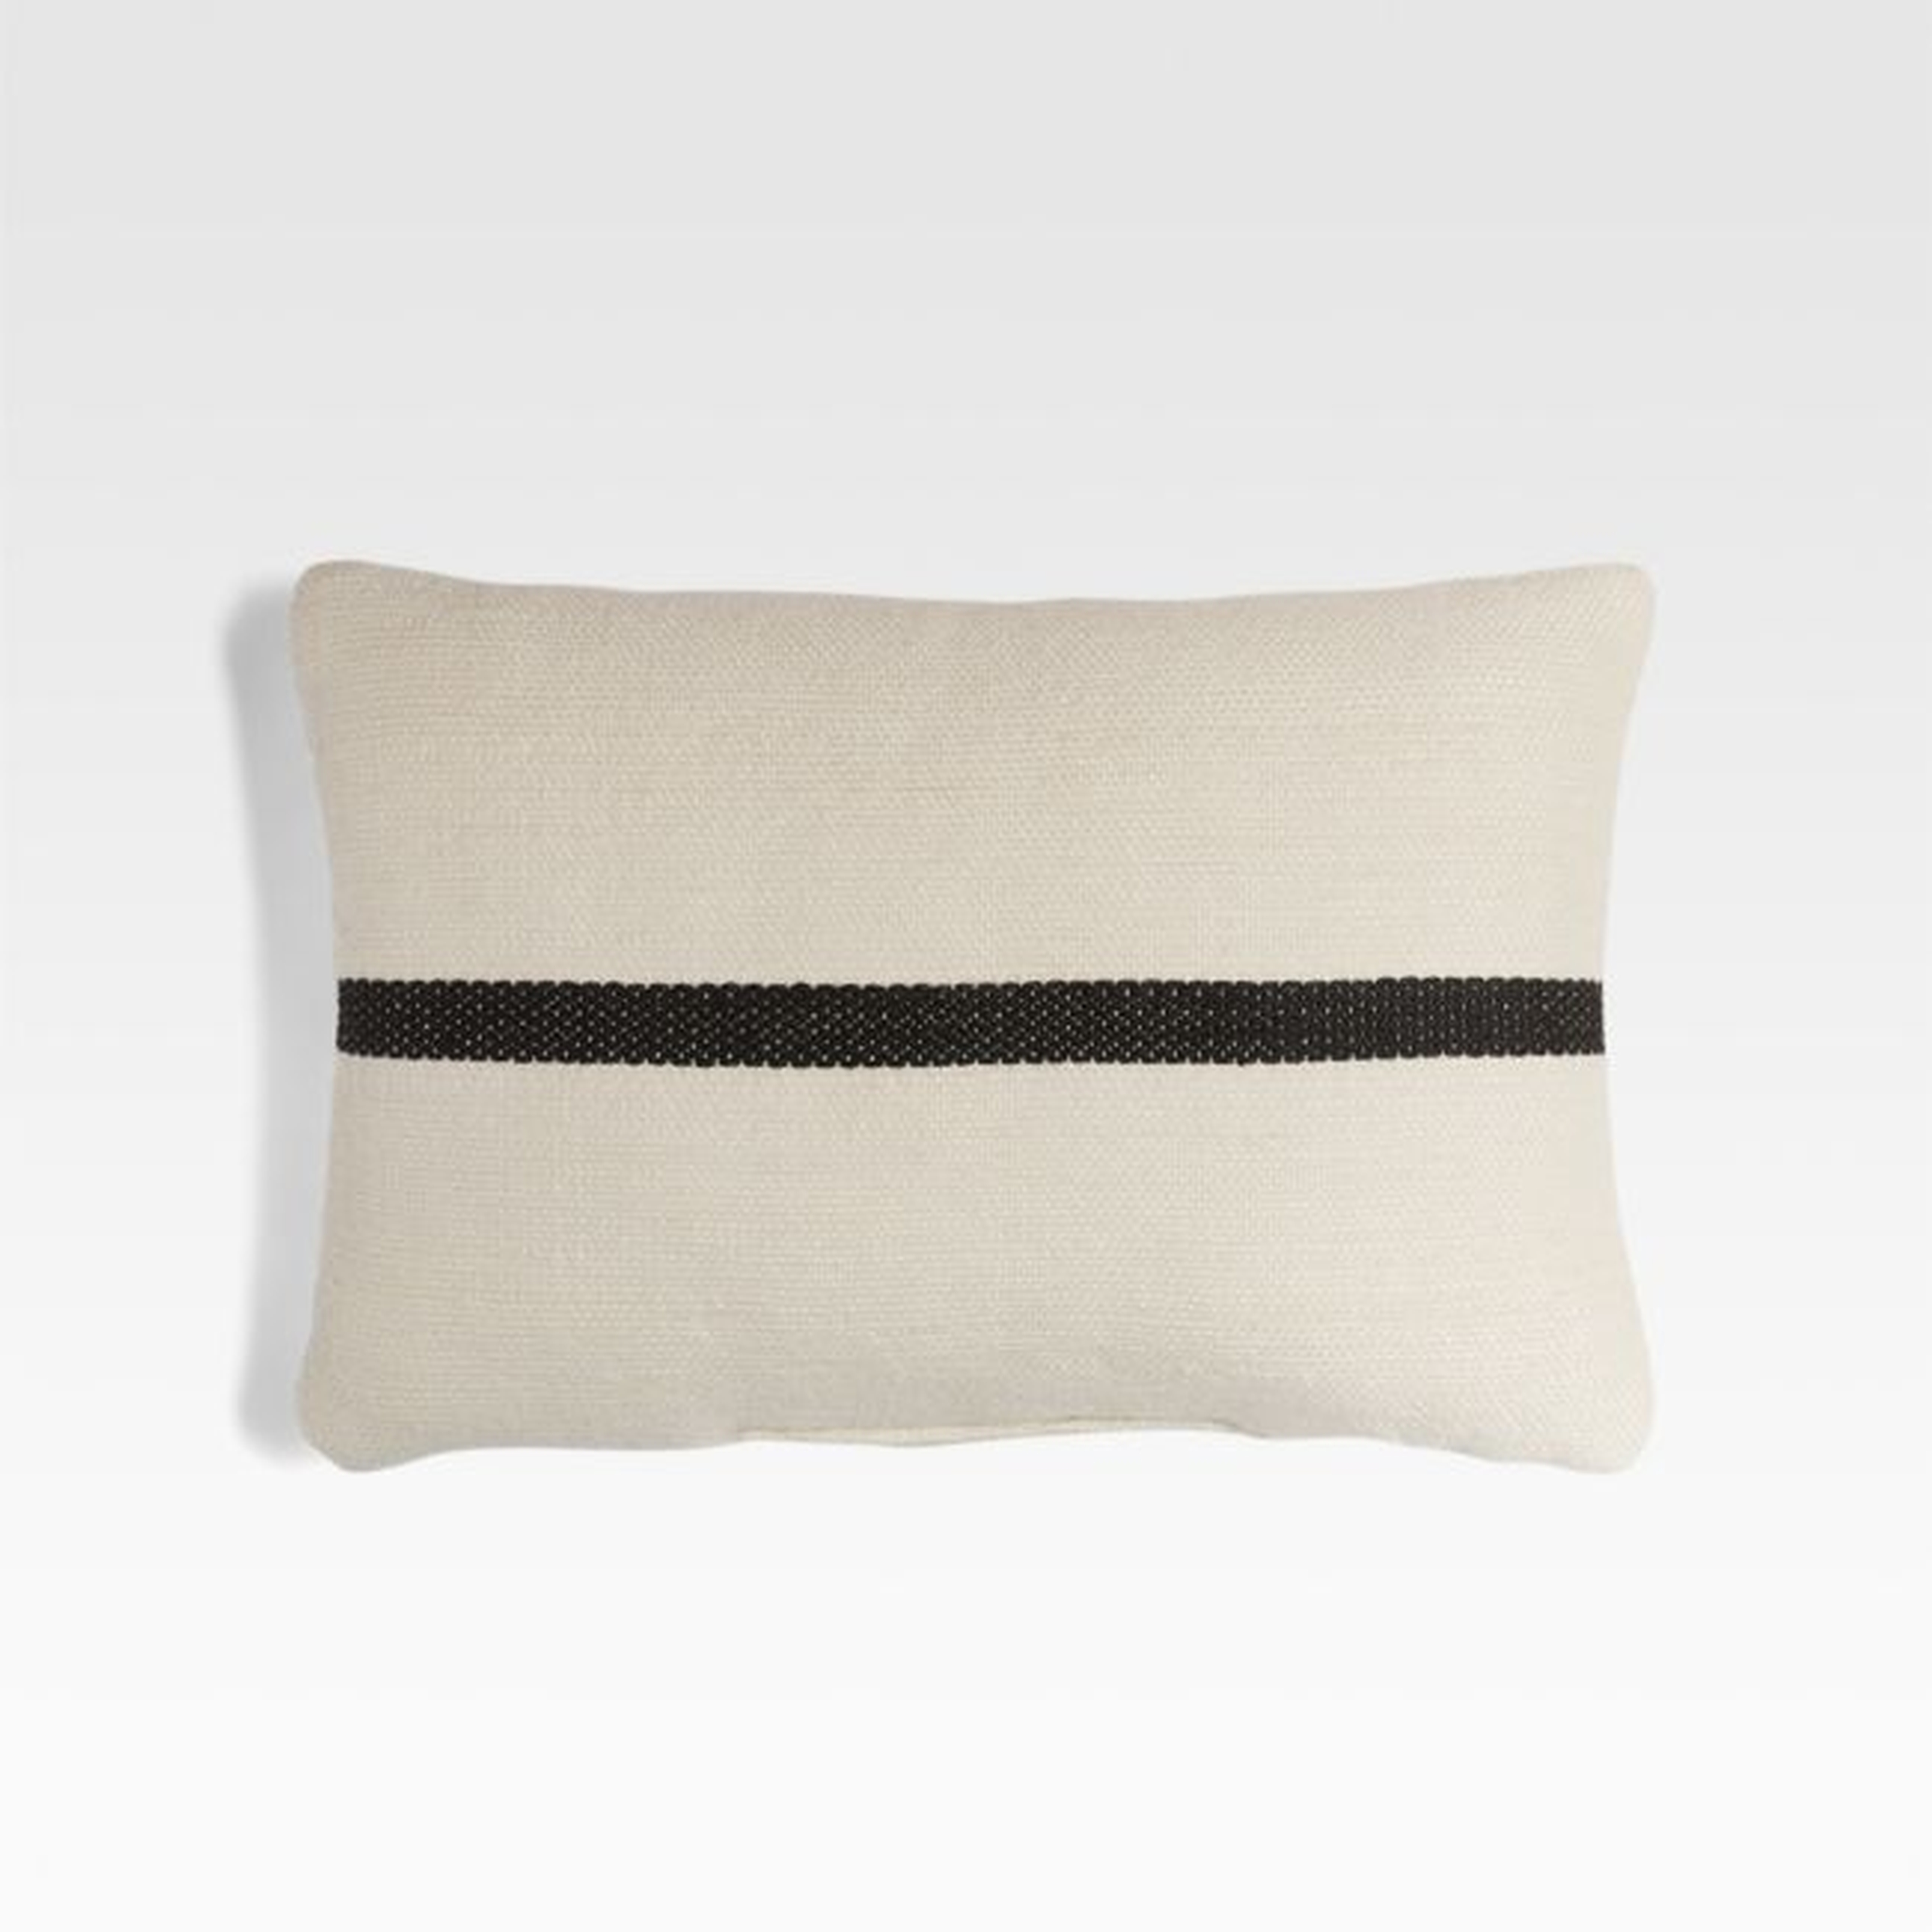 Sela 20"x13" Stripe Black and White Outdoor Pillow - Crate and Barrel